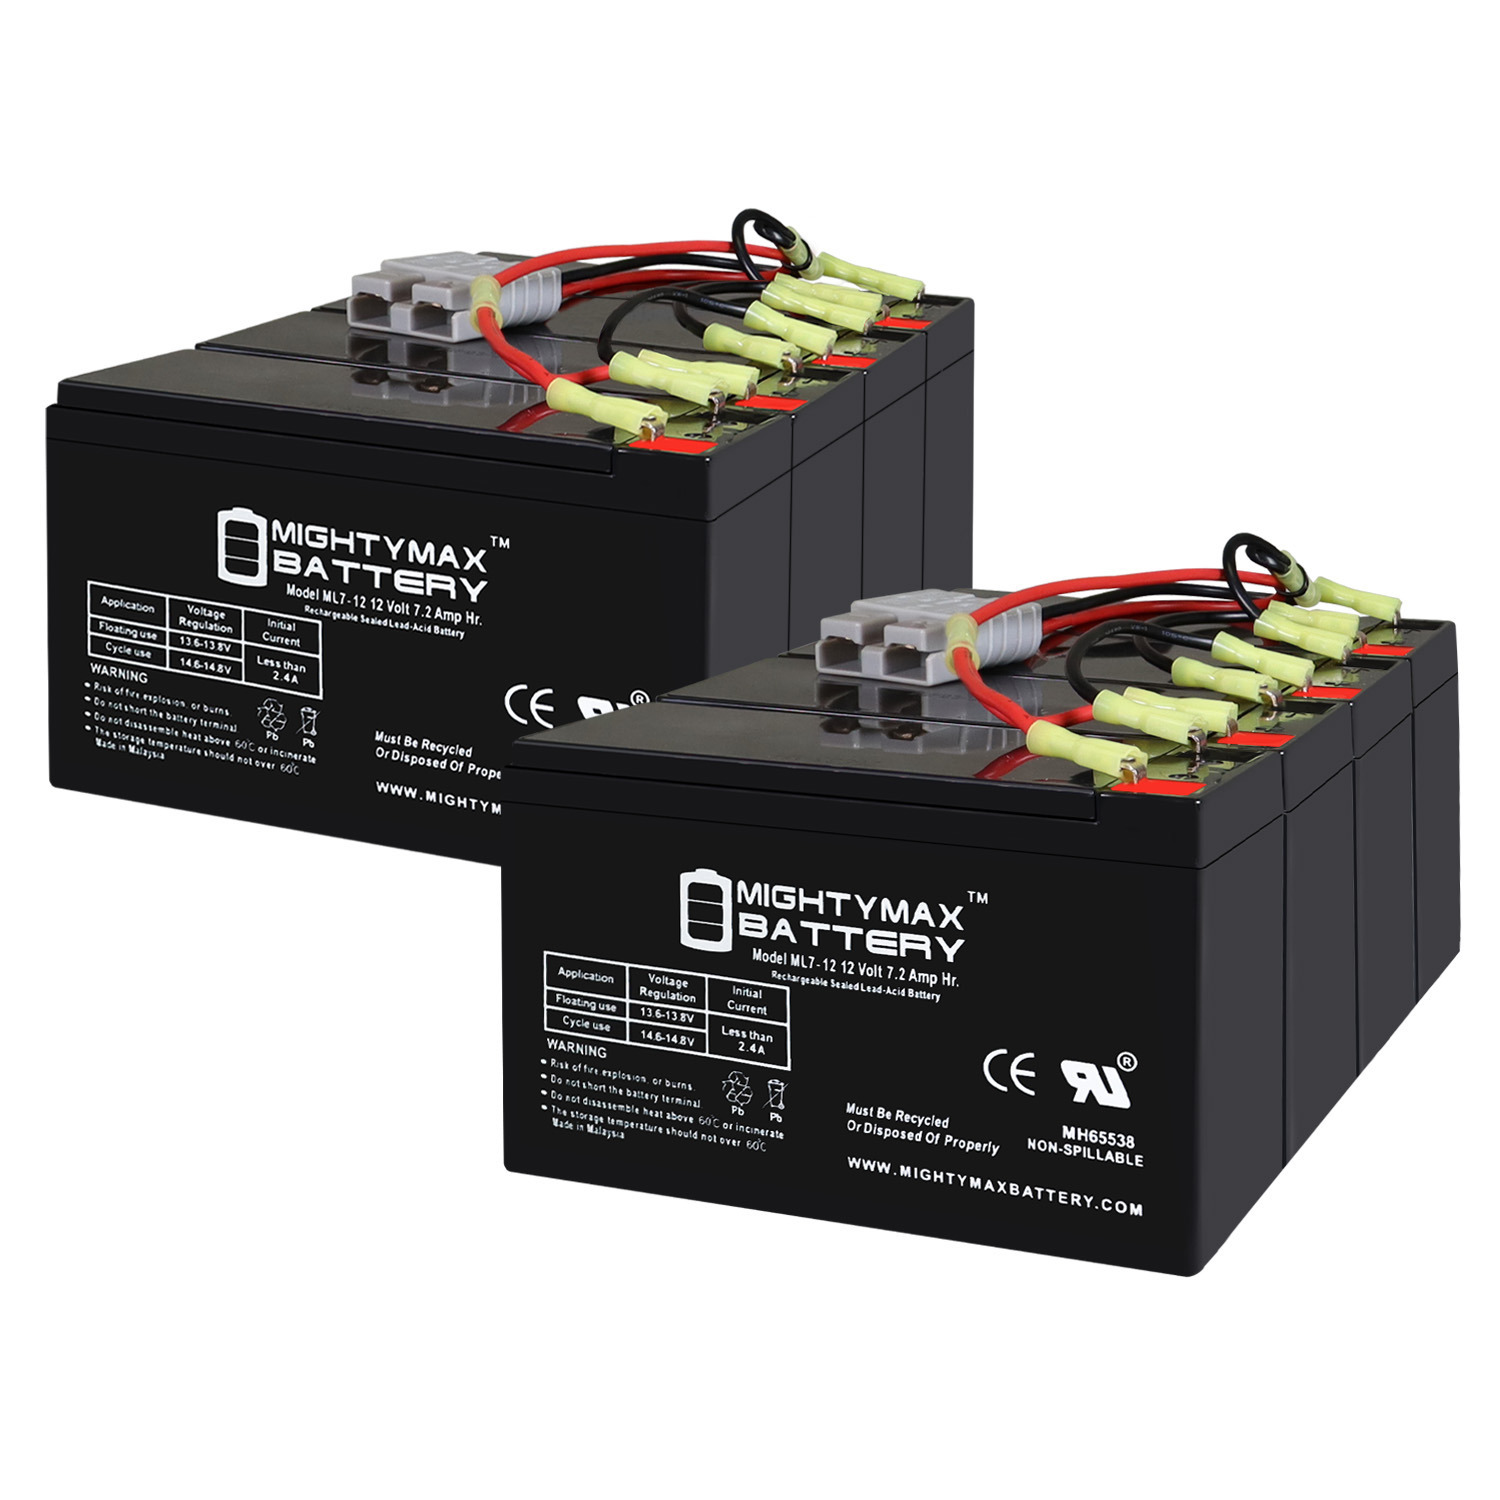 RBC12 UPS Complete Replacement Battery Kit for DL2200RM13U